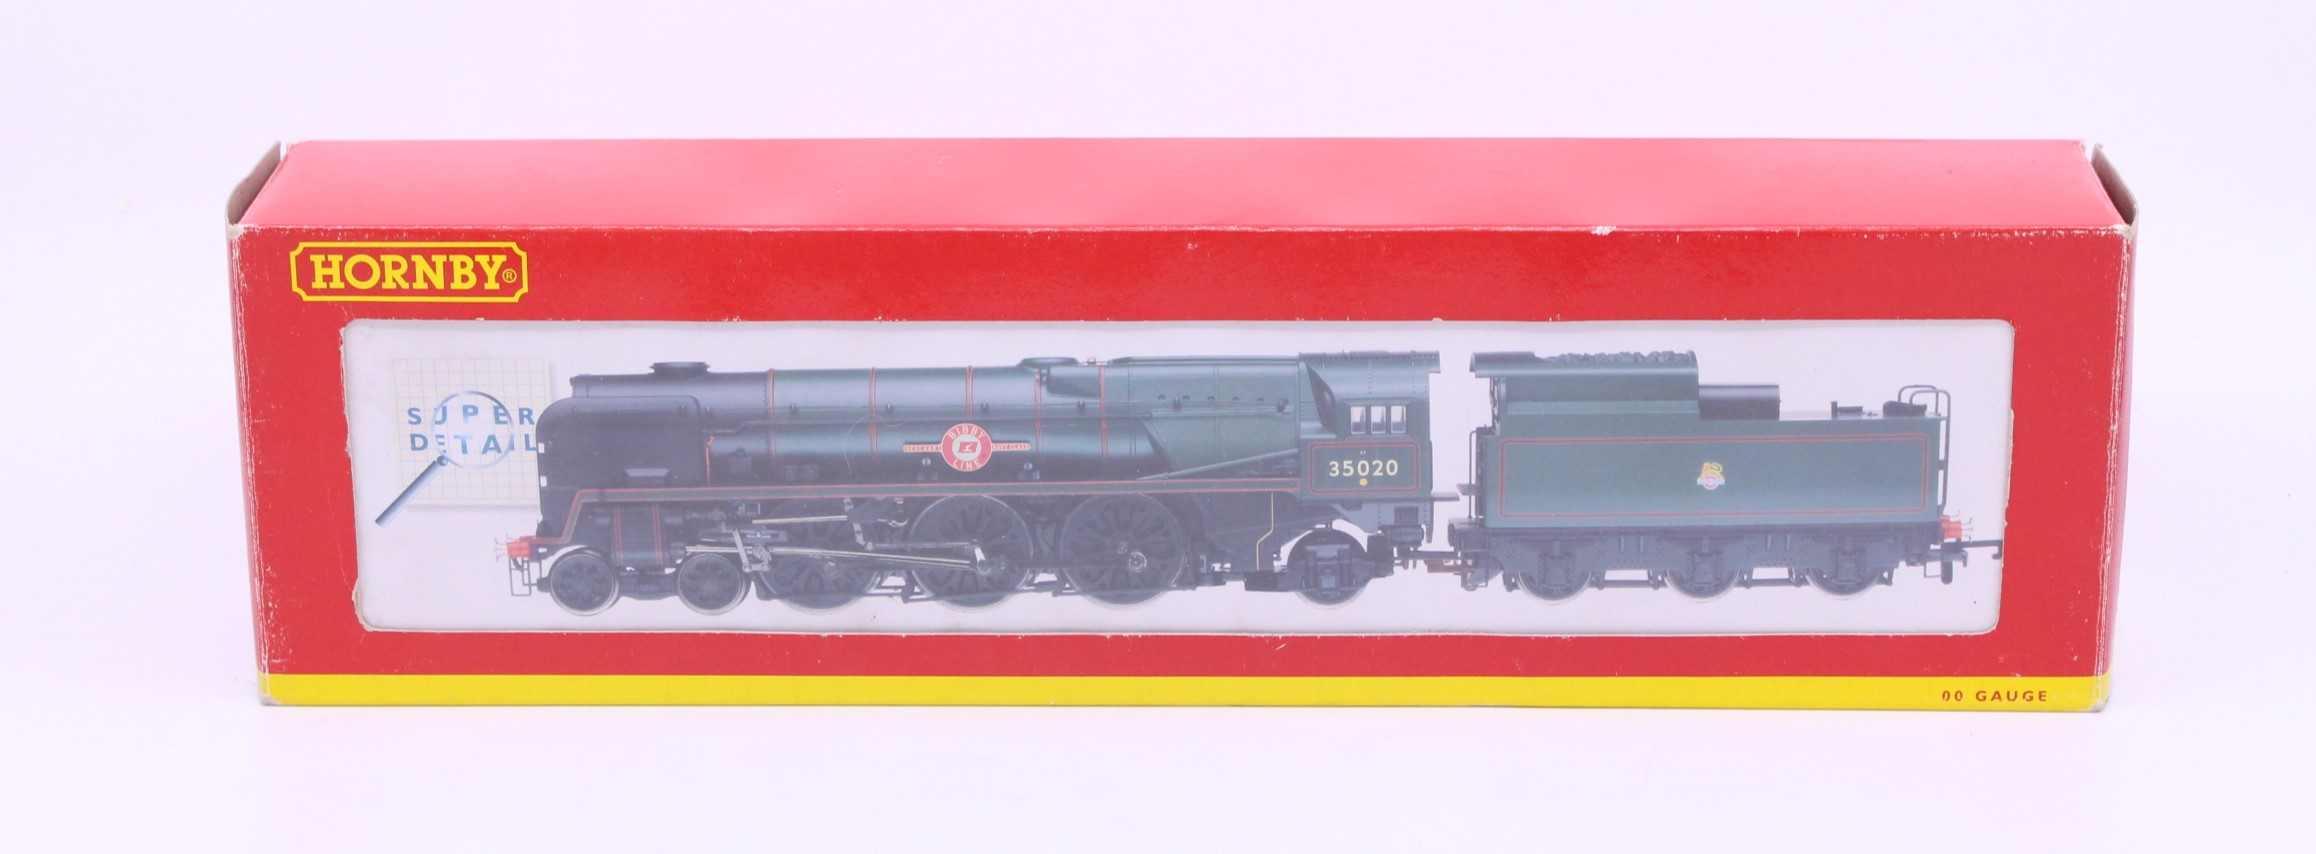 Hornby: A boxed Hornby, OO Gauge, BR 4-6-2 35020 'Bibby Line' Merchant Navy Class Locomotive and